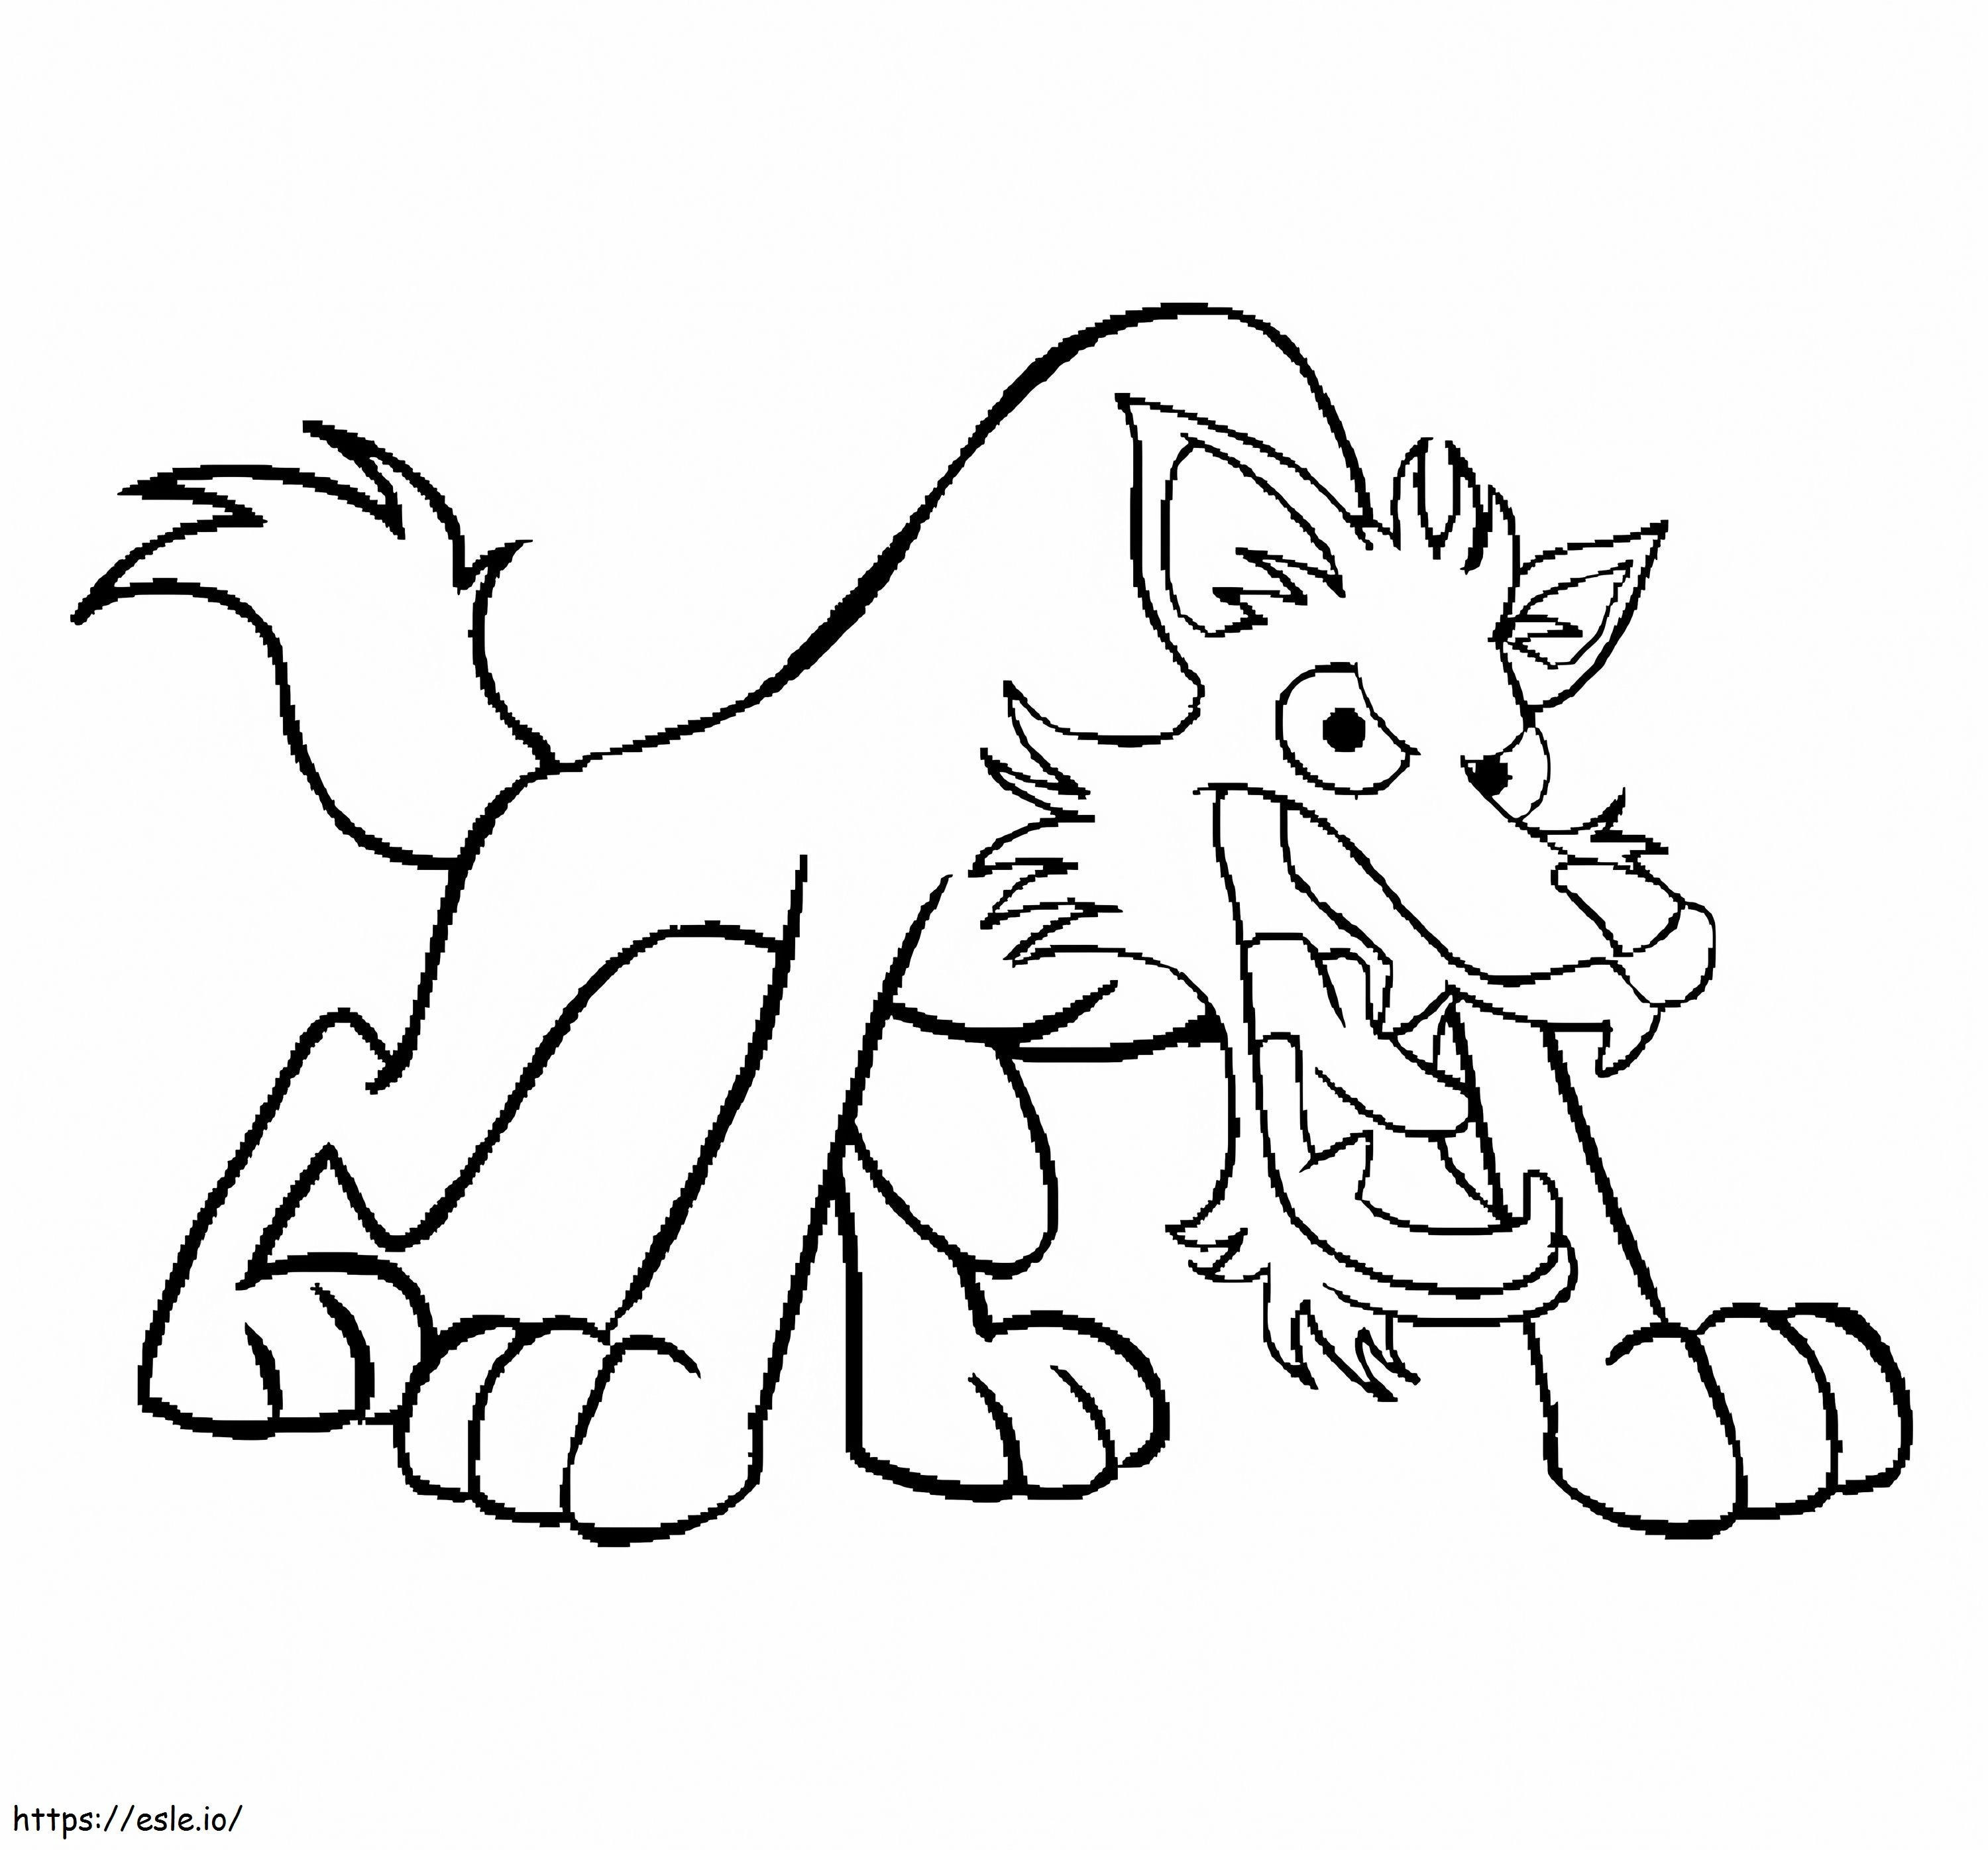 Cartoon Bad Wolf coloring page